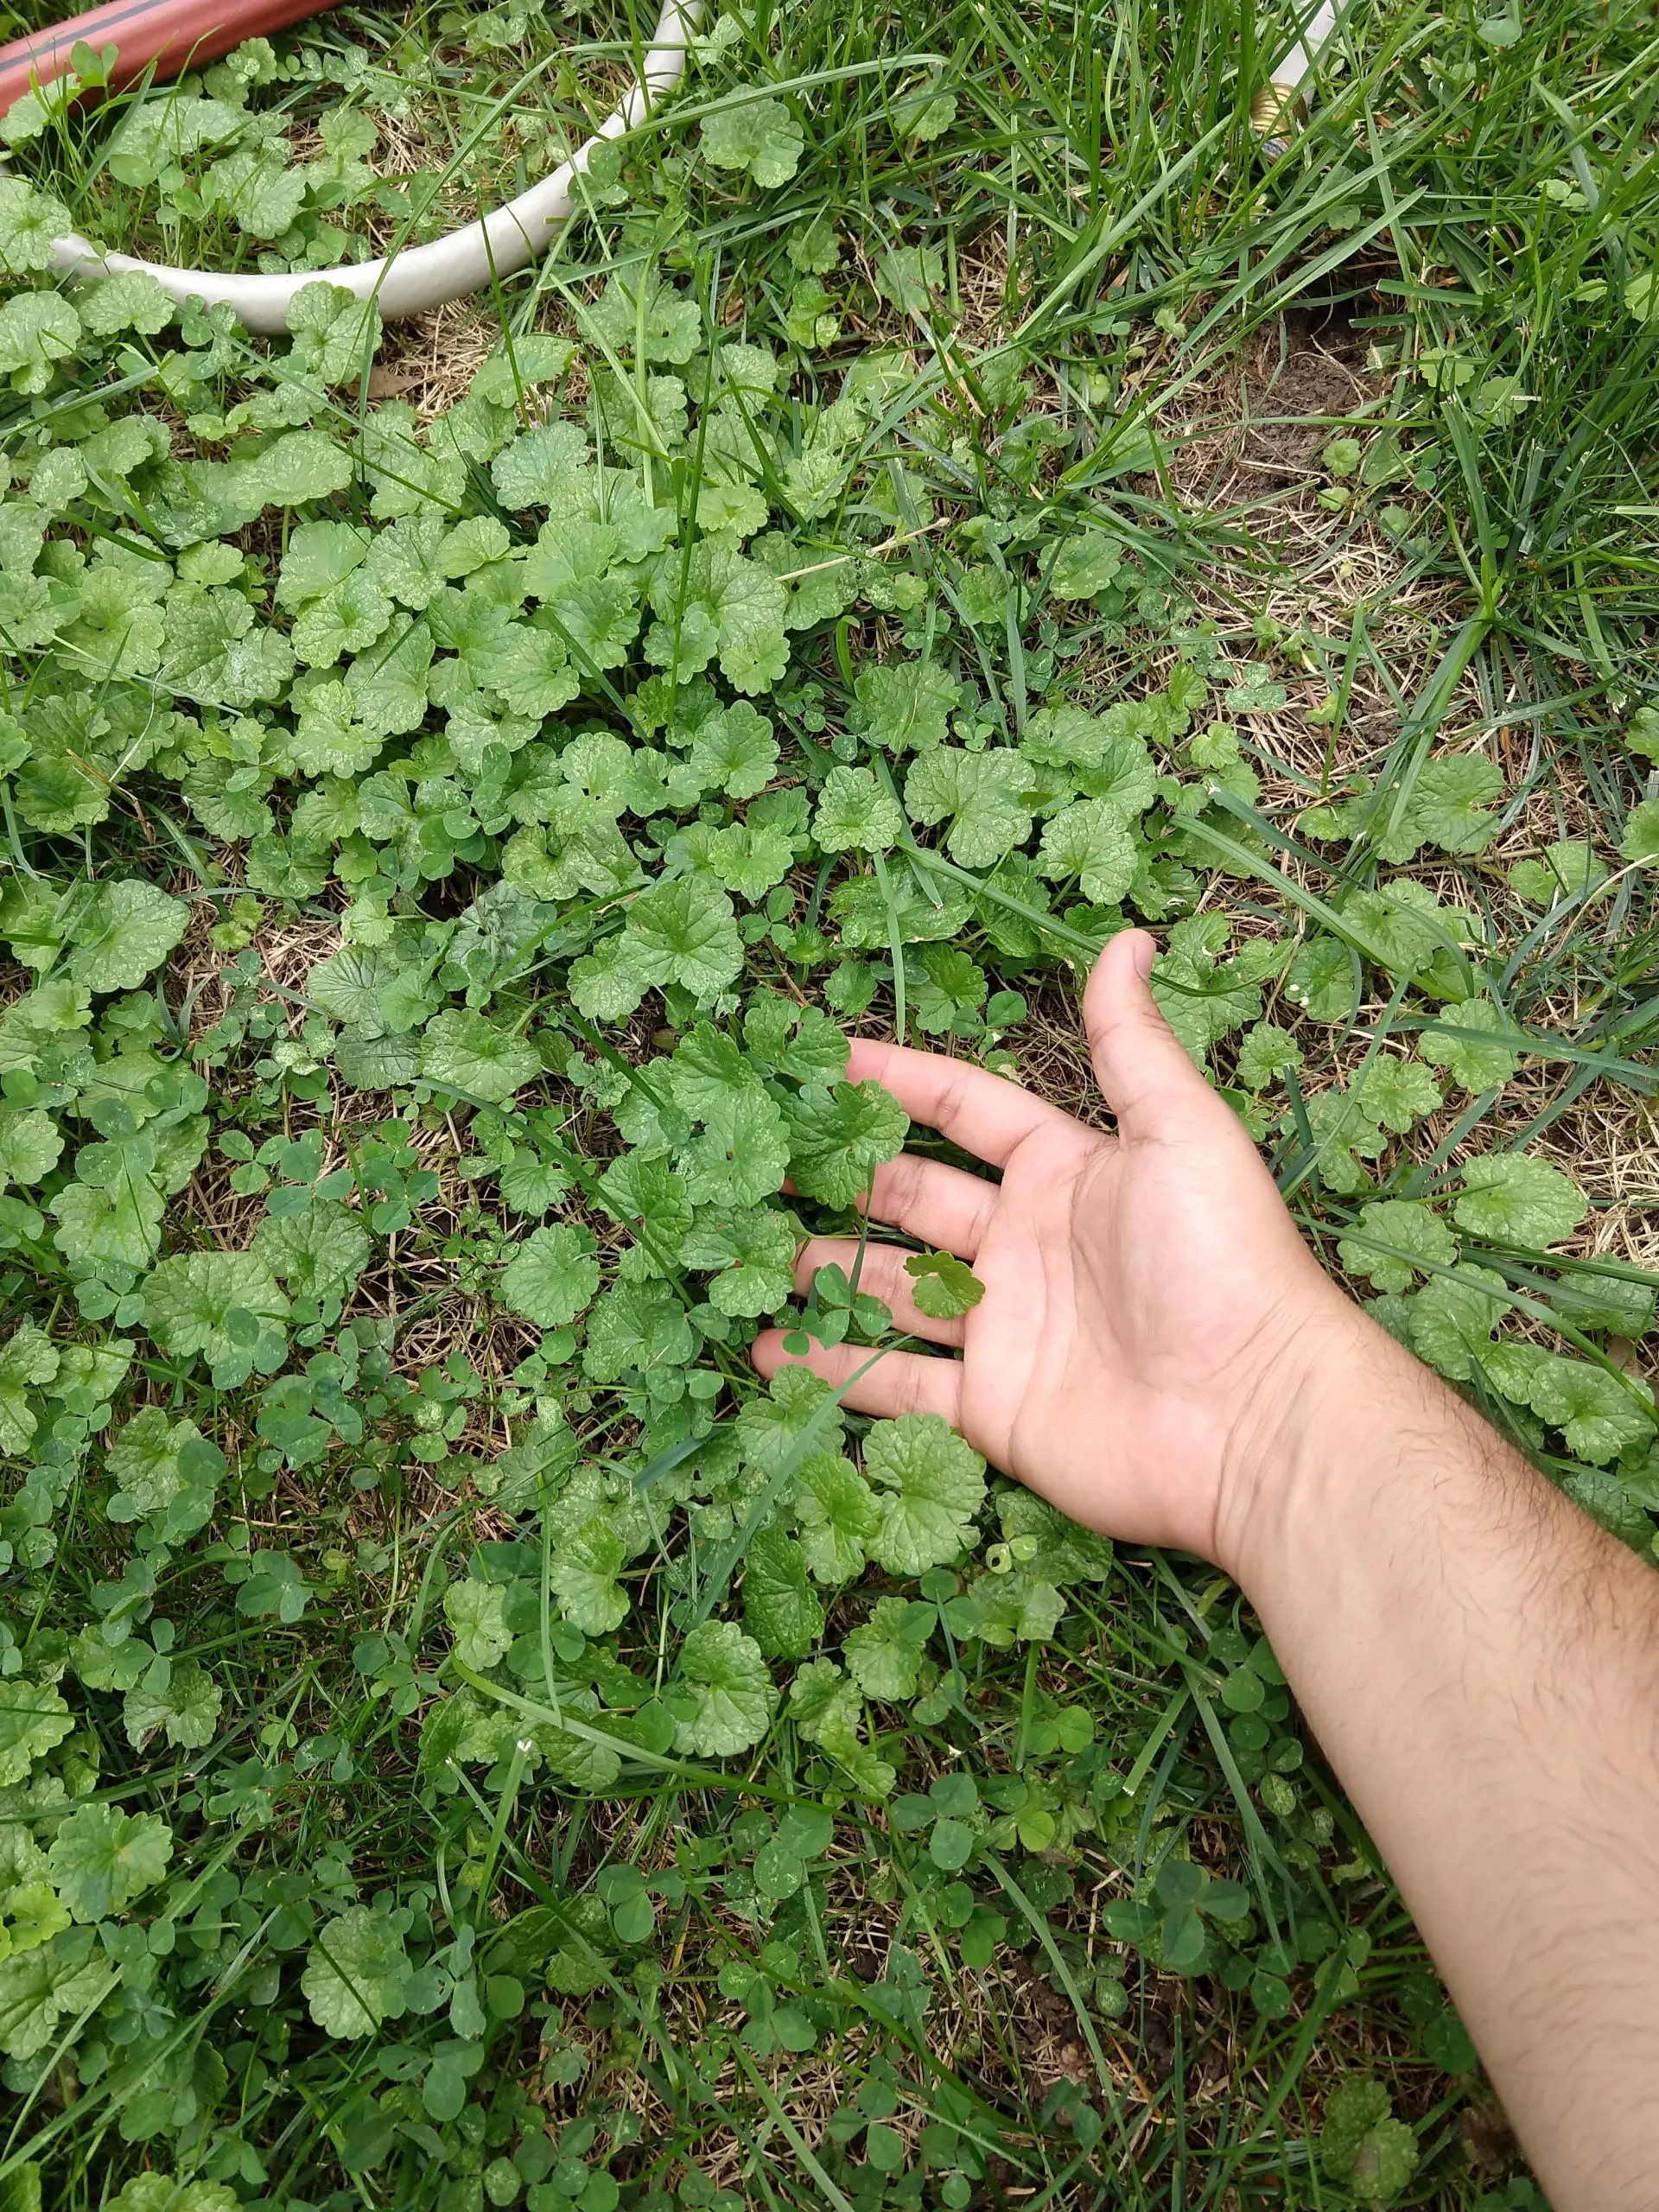 What is this weed spreading and taking over my lawn ...